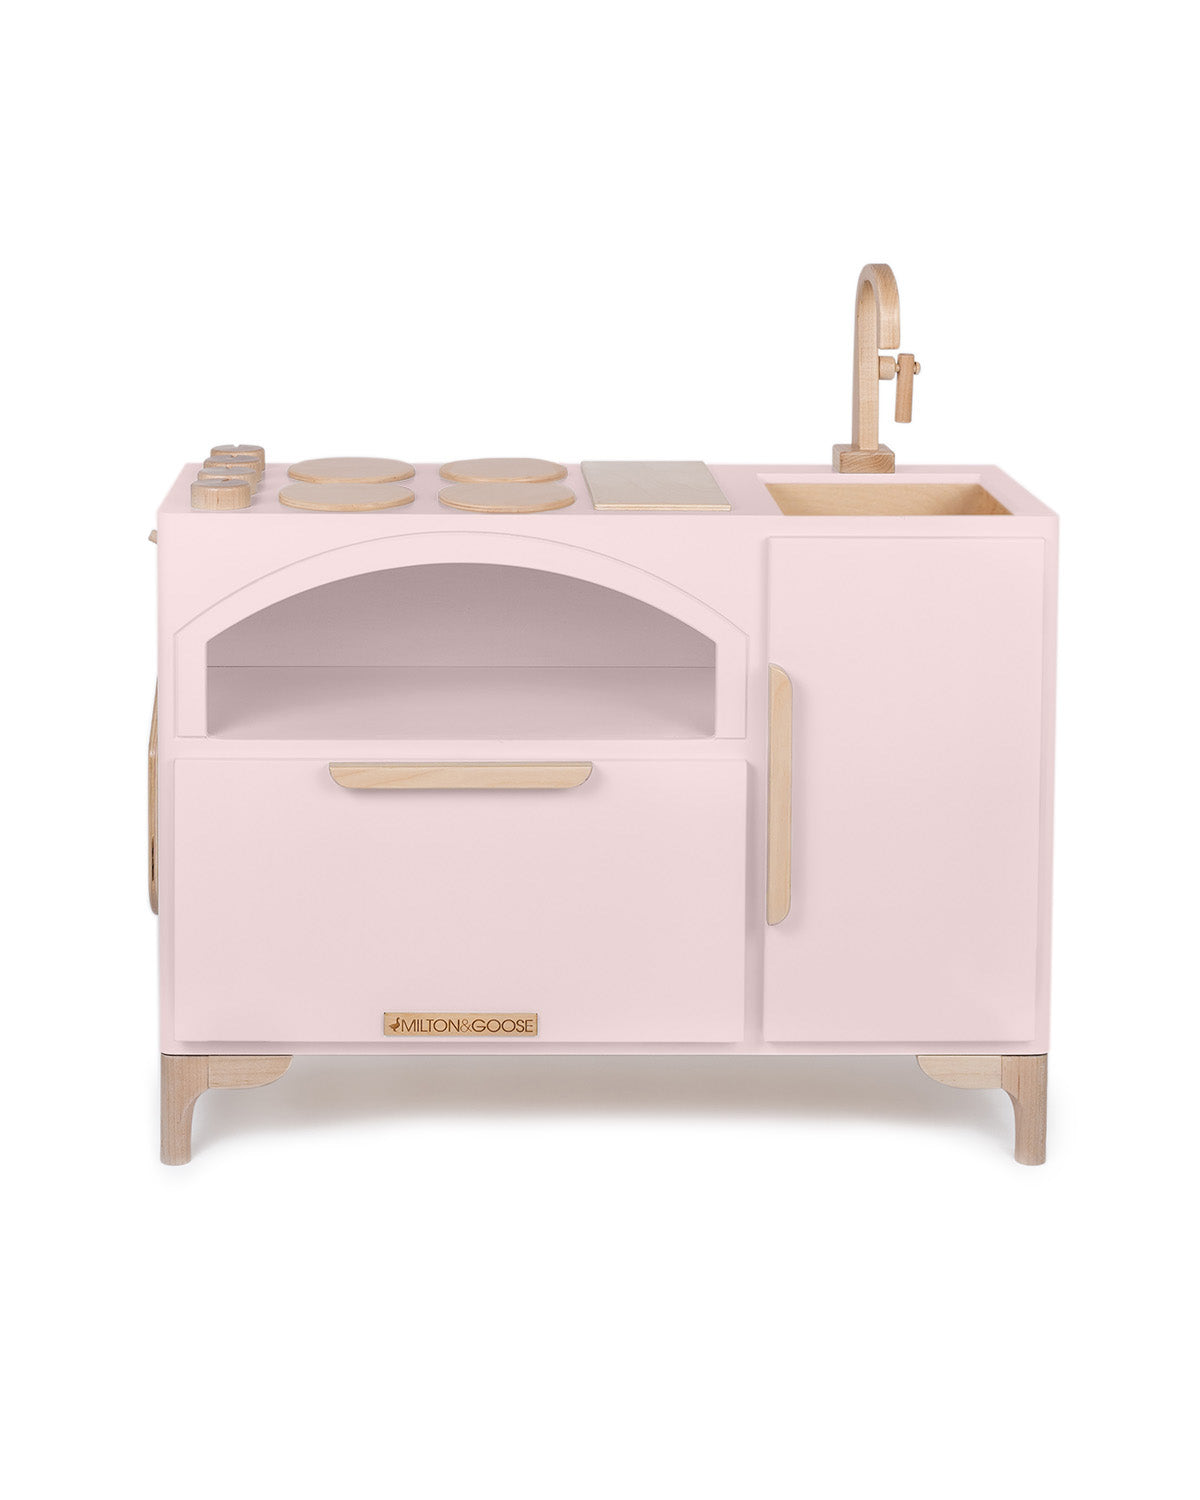 Milton & Goose's Luca Play Kitchen in dusty rose, a pink/gray color. Featuring a pizza oven and coordinating pizza paddle.